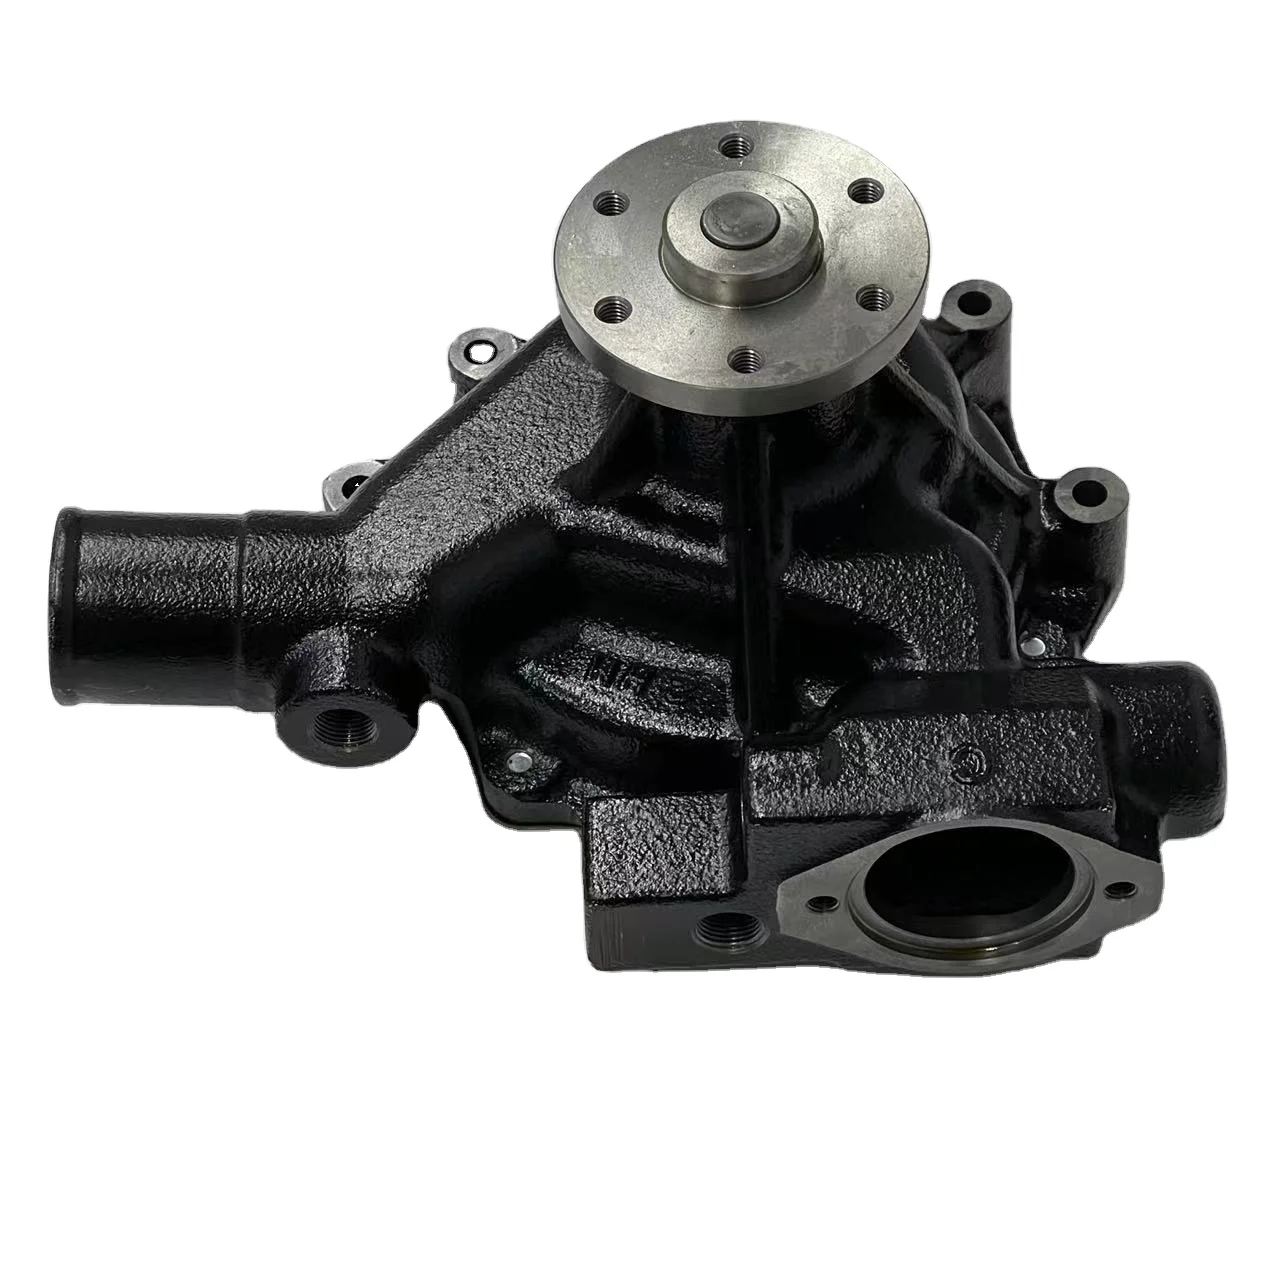 

6205-61-1300 for PC130-8 Excavator water pump